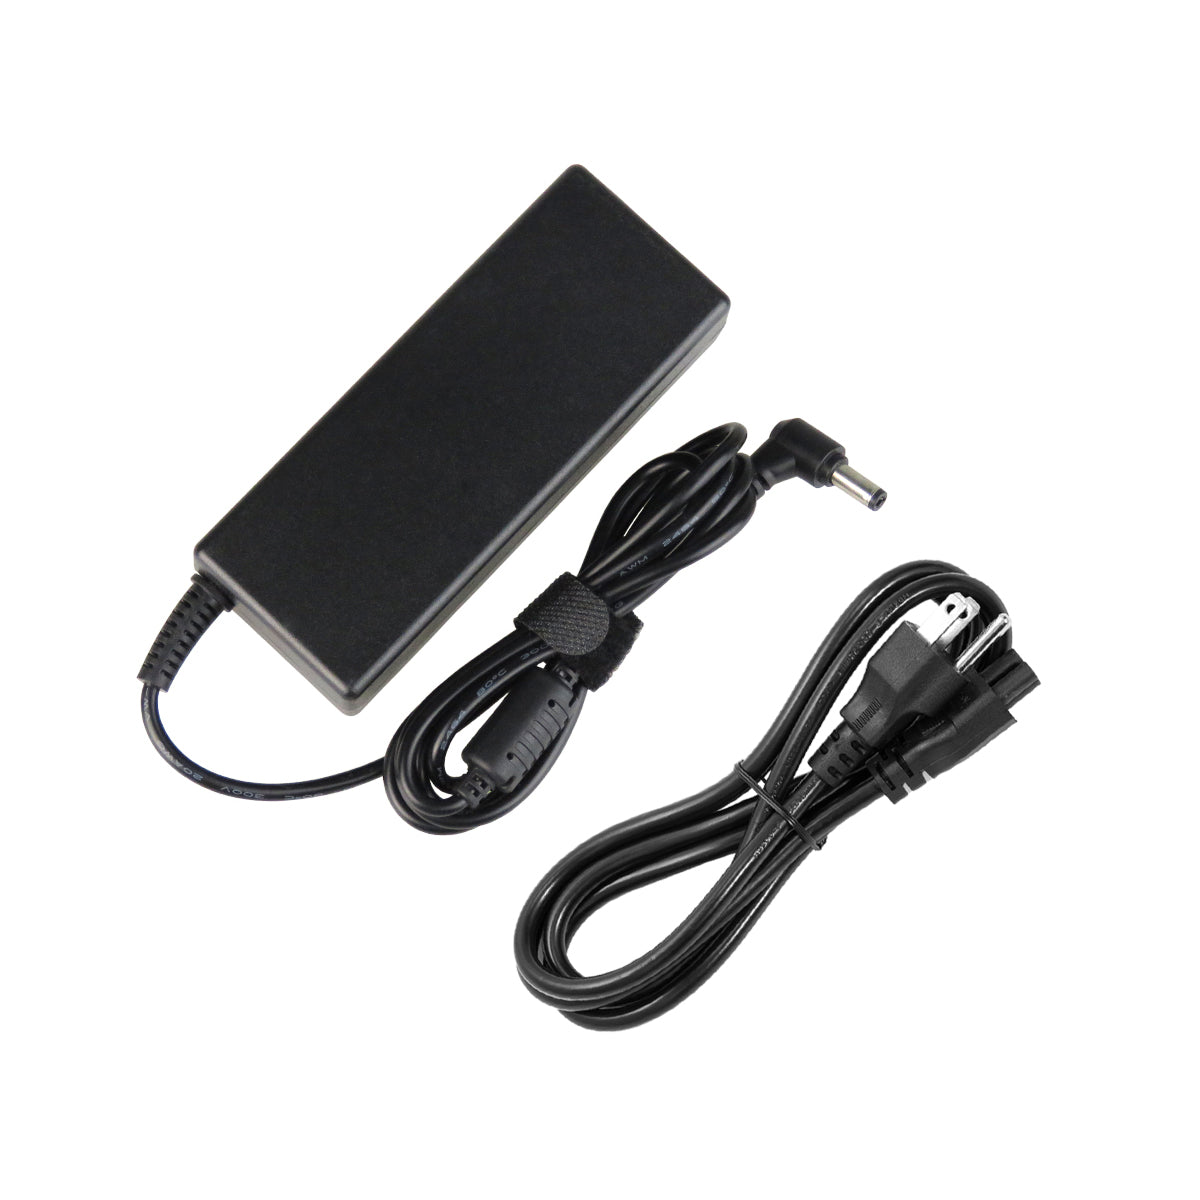 AC Adapter Charger for ASUS K43SA Notebook.